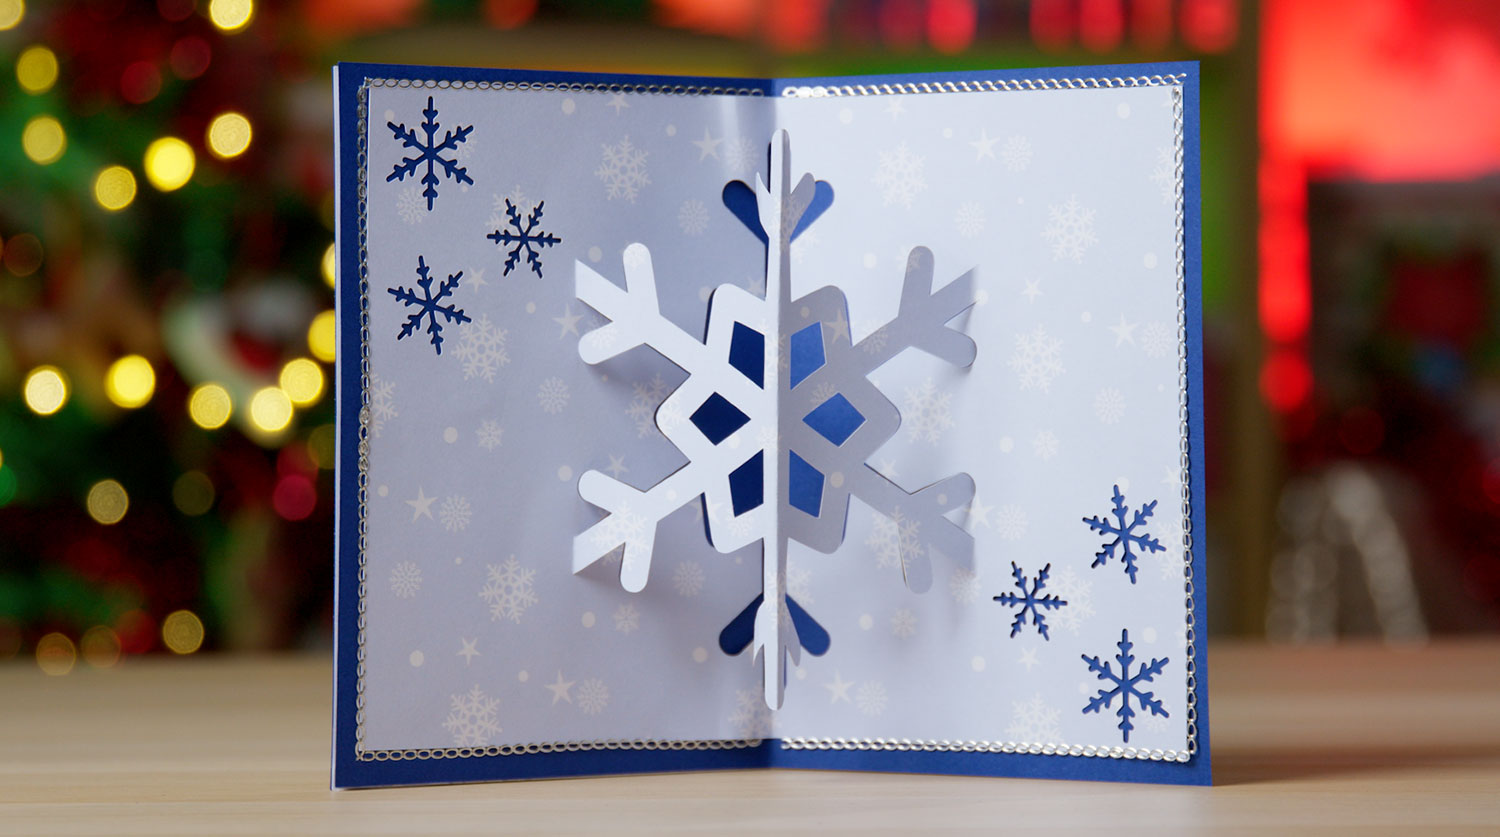 3D Pop Up Christmas Card with Snowflakes